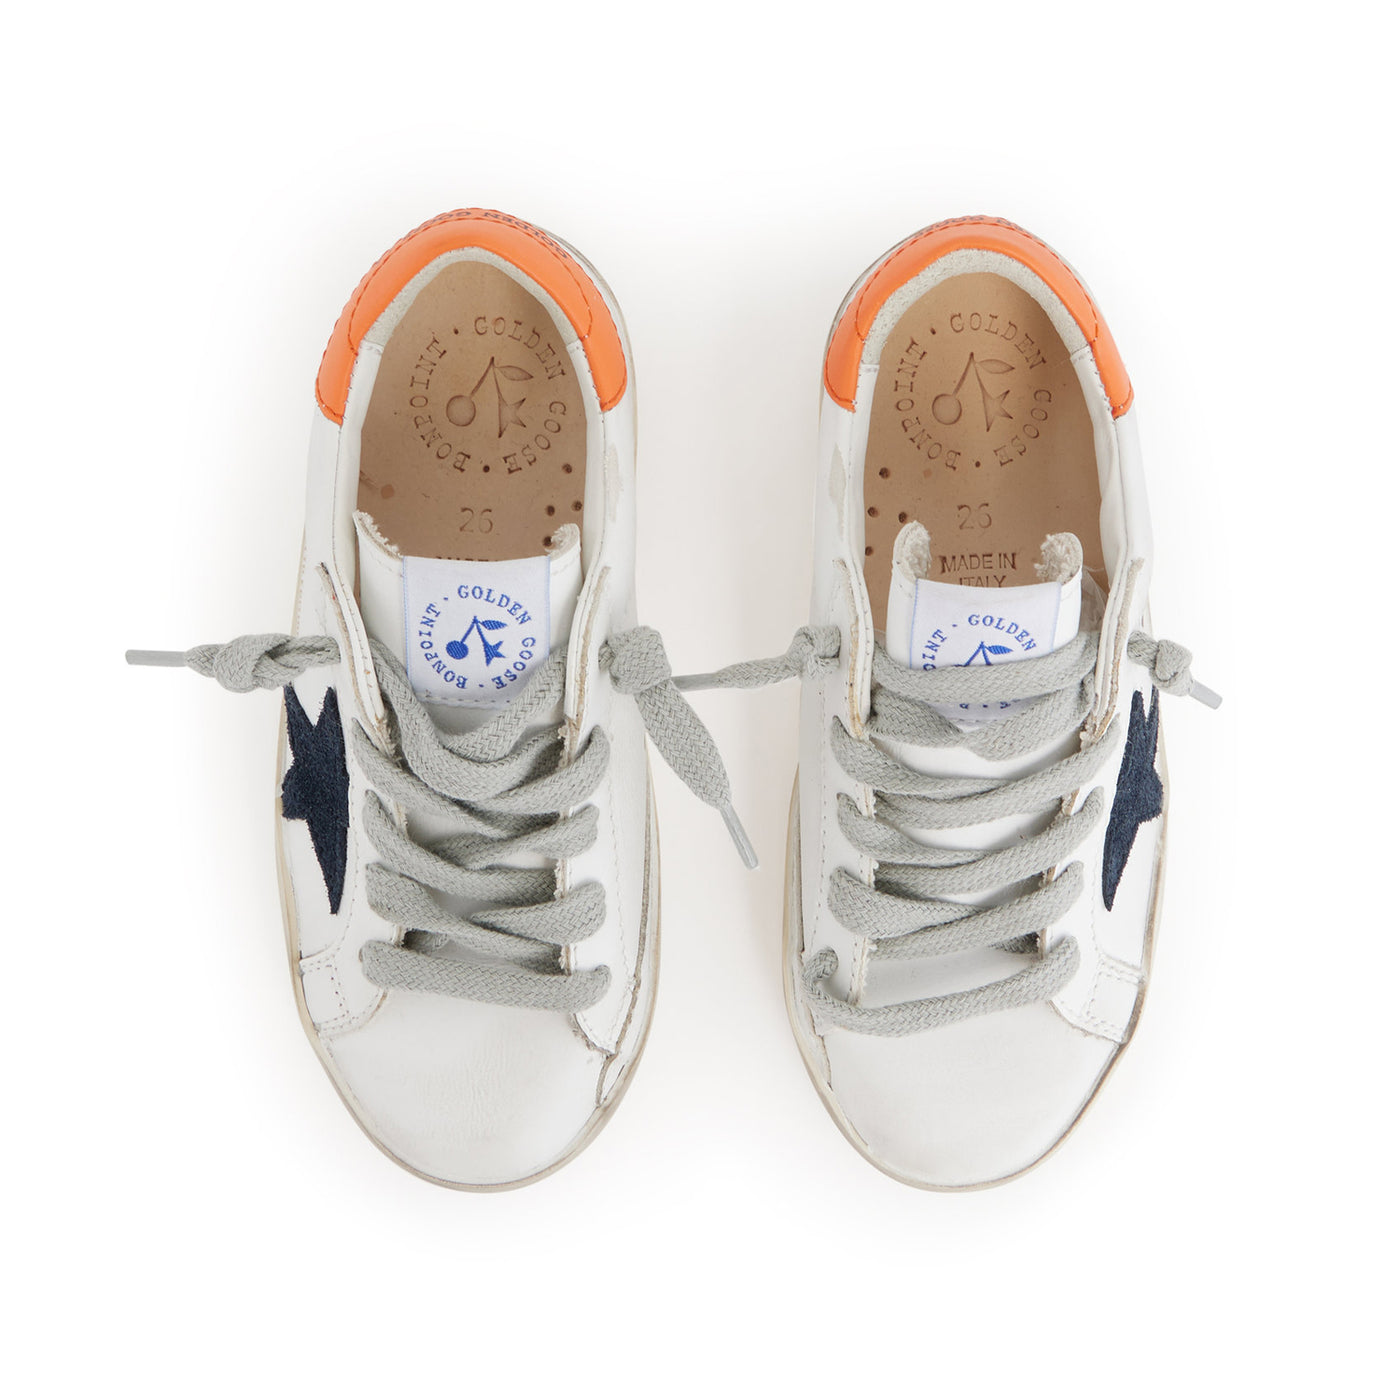 Bonpoint x Golden Goose Leather Sneakers blue